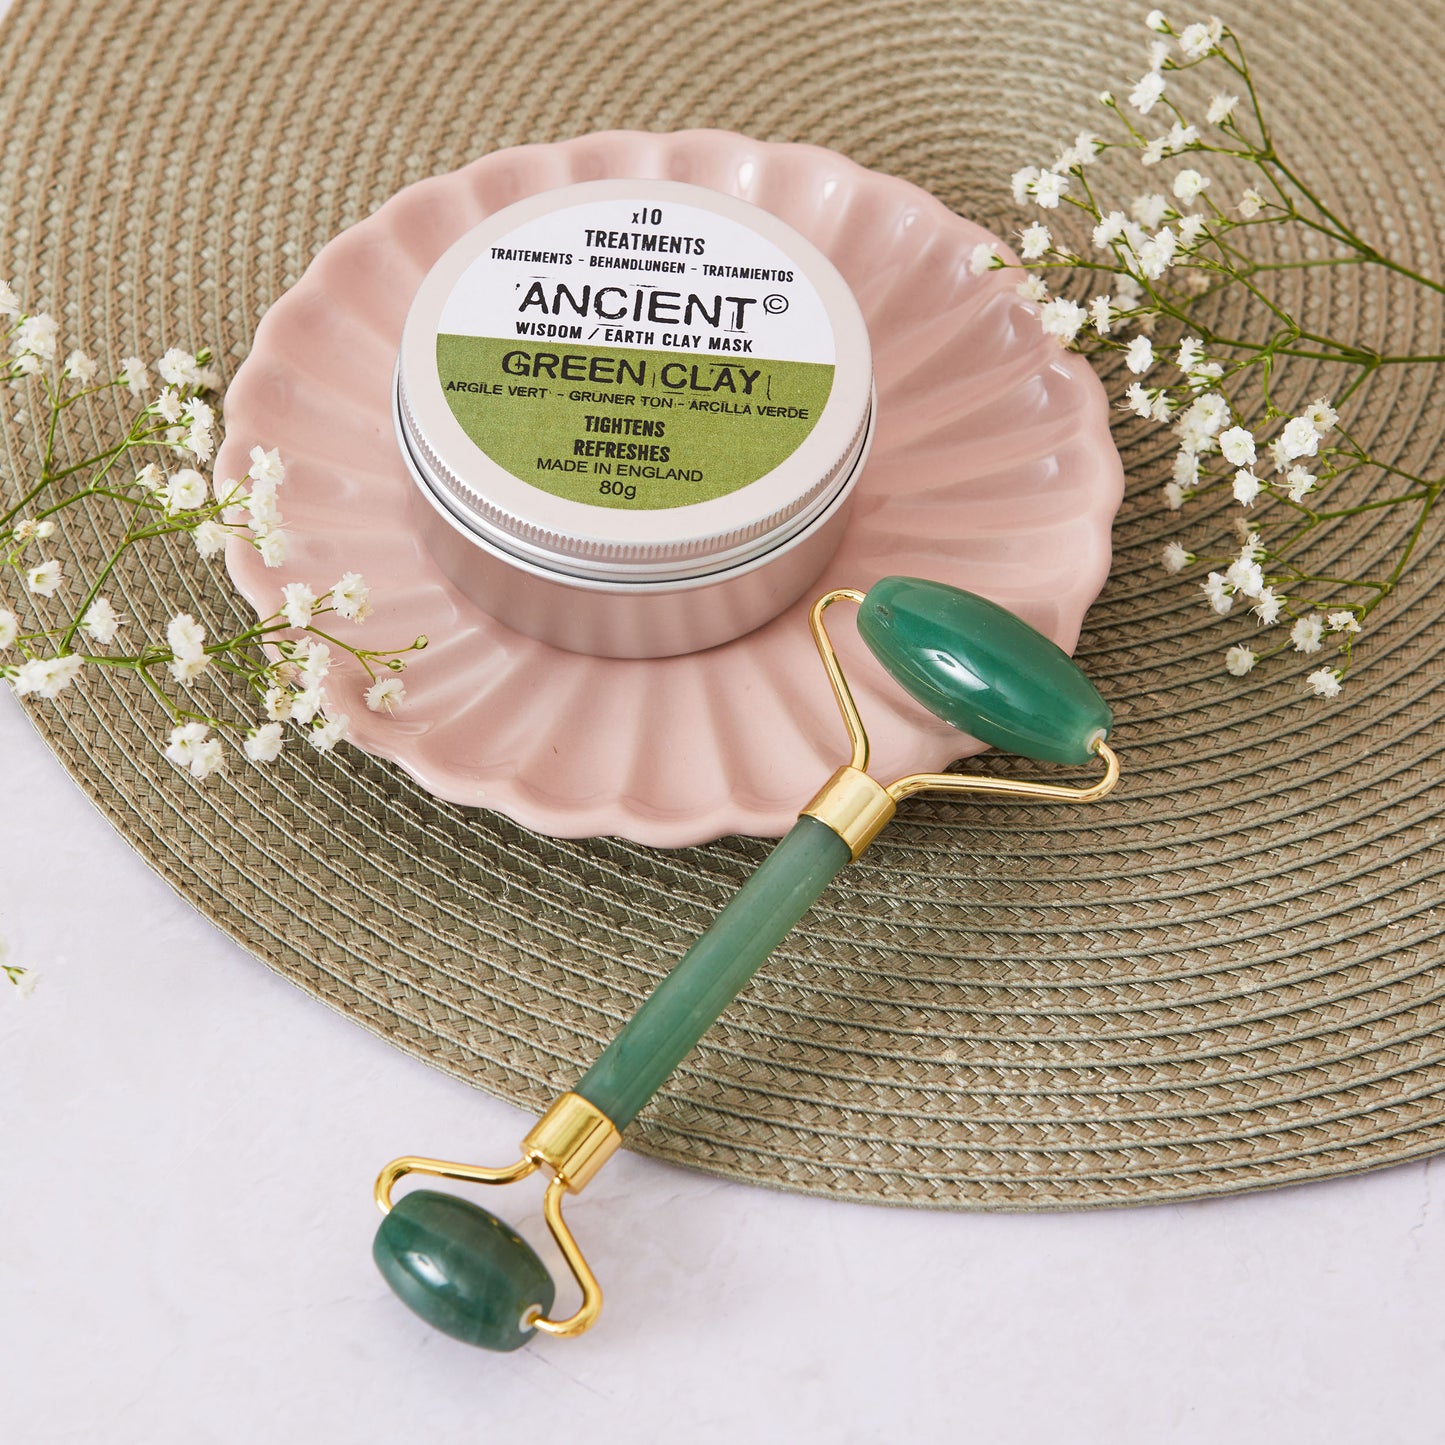 Set of Green Clay Mask and Jade Face Roller